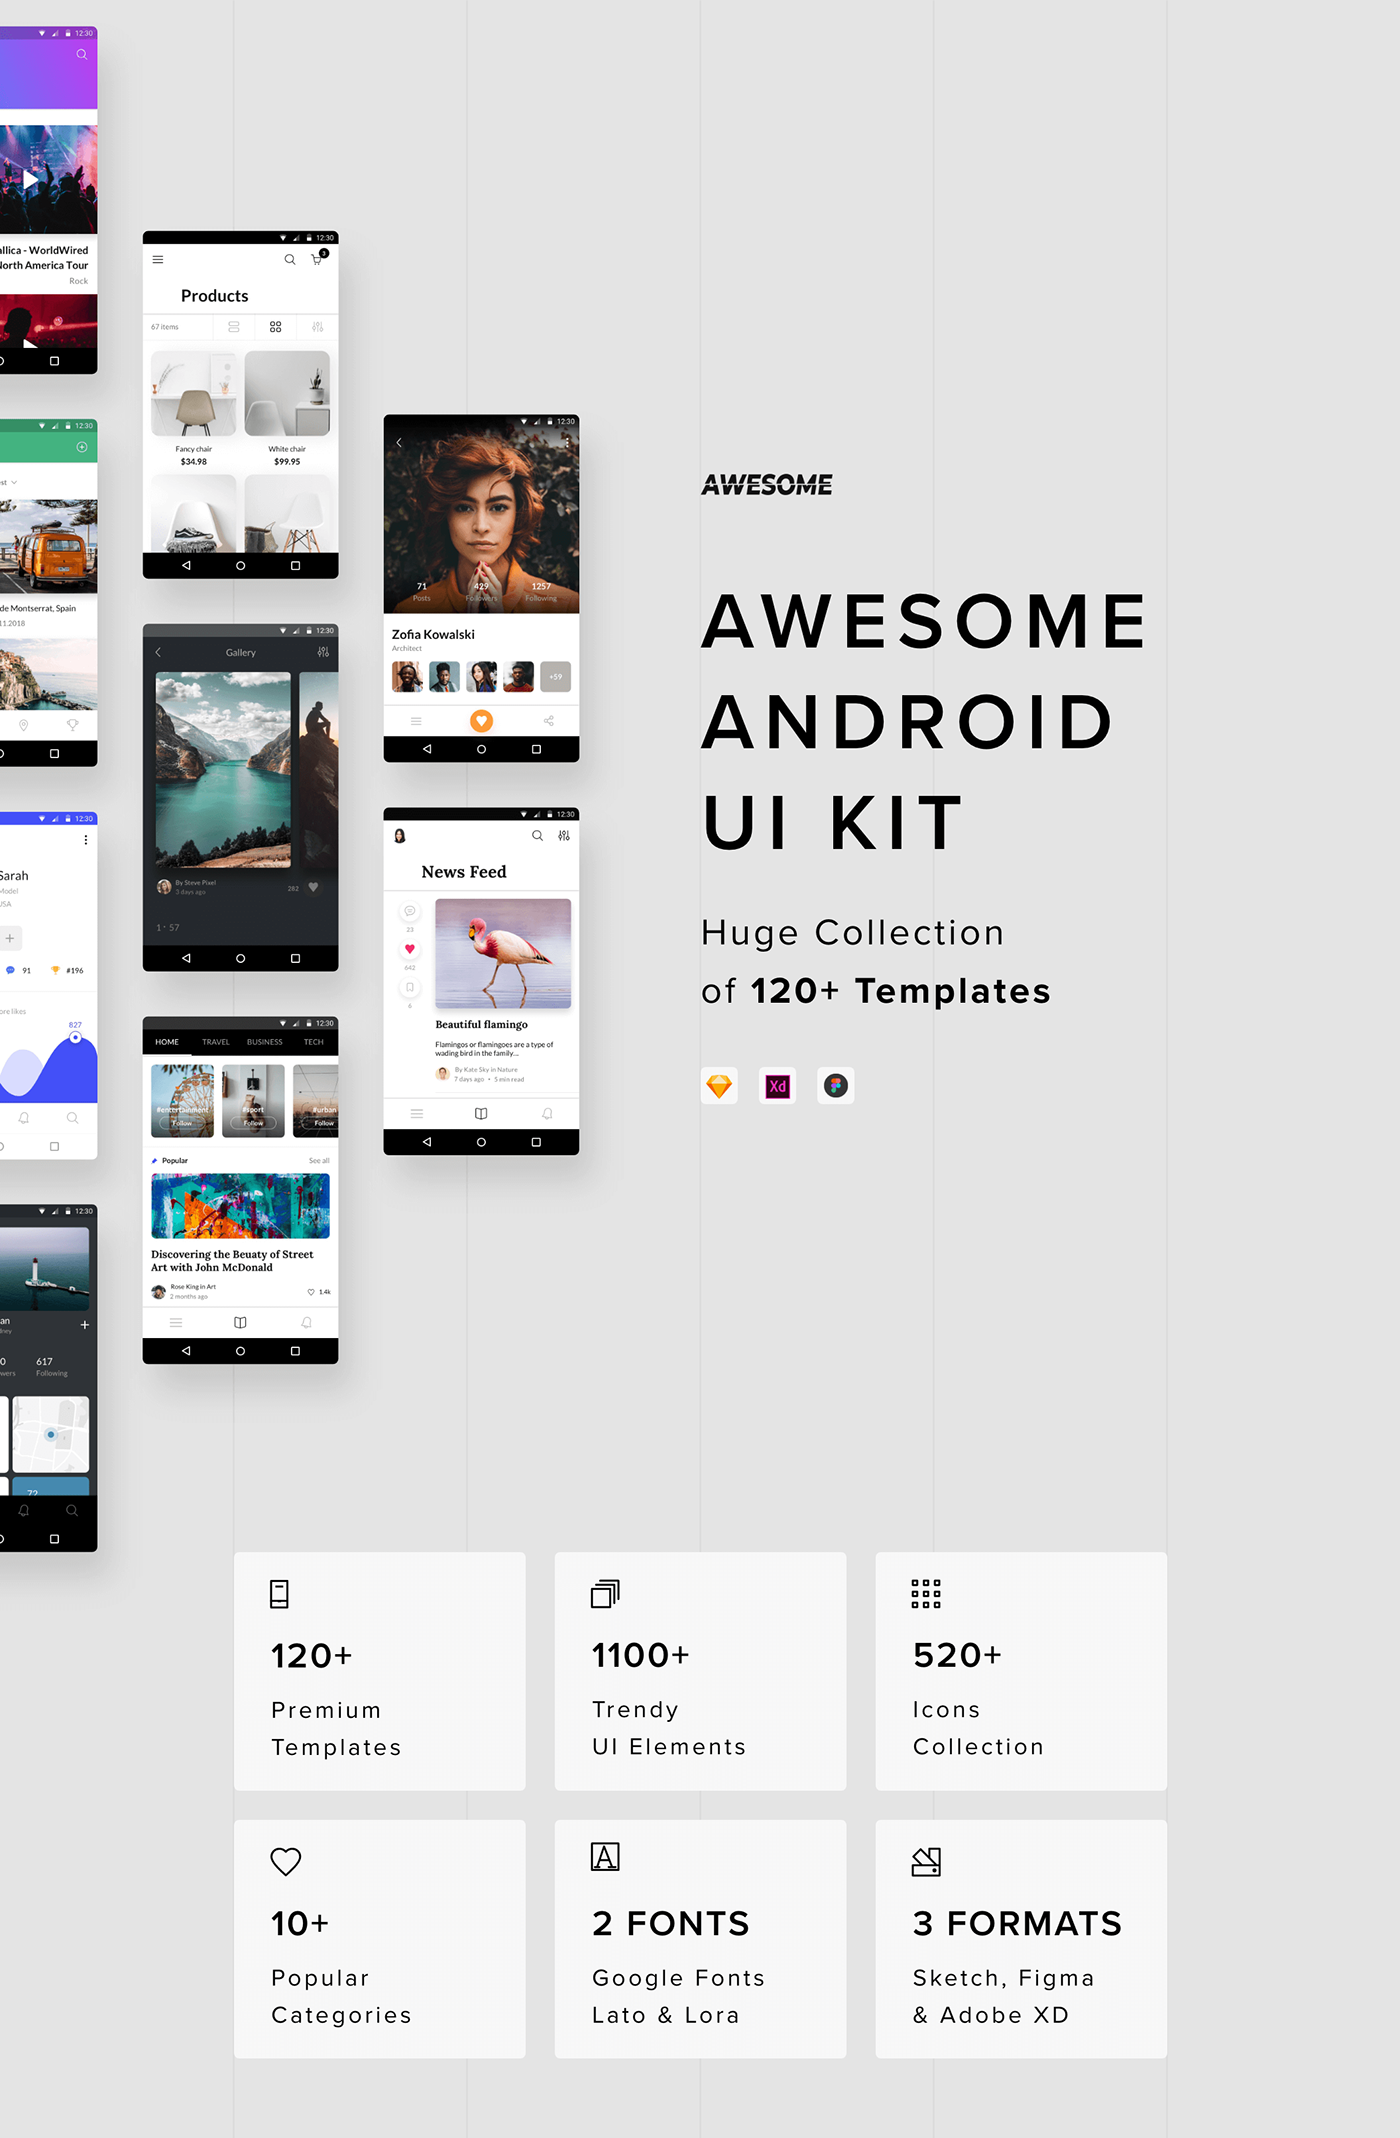 ui kit android material design sketch Adobe XD Figma vector templates screens